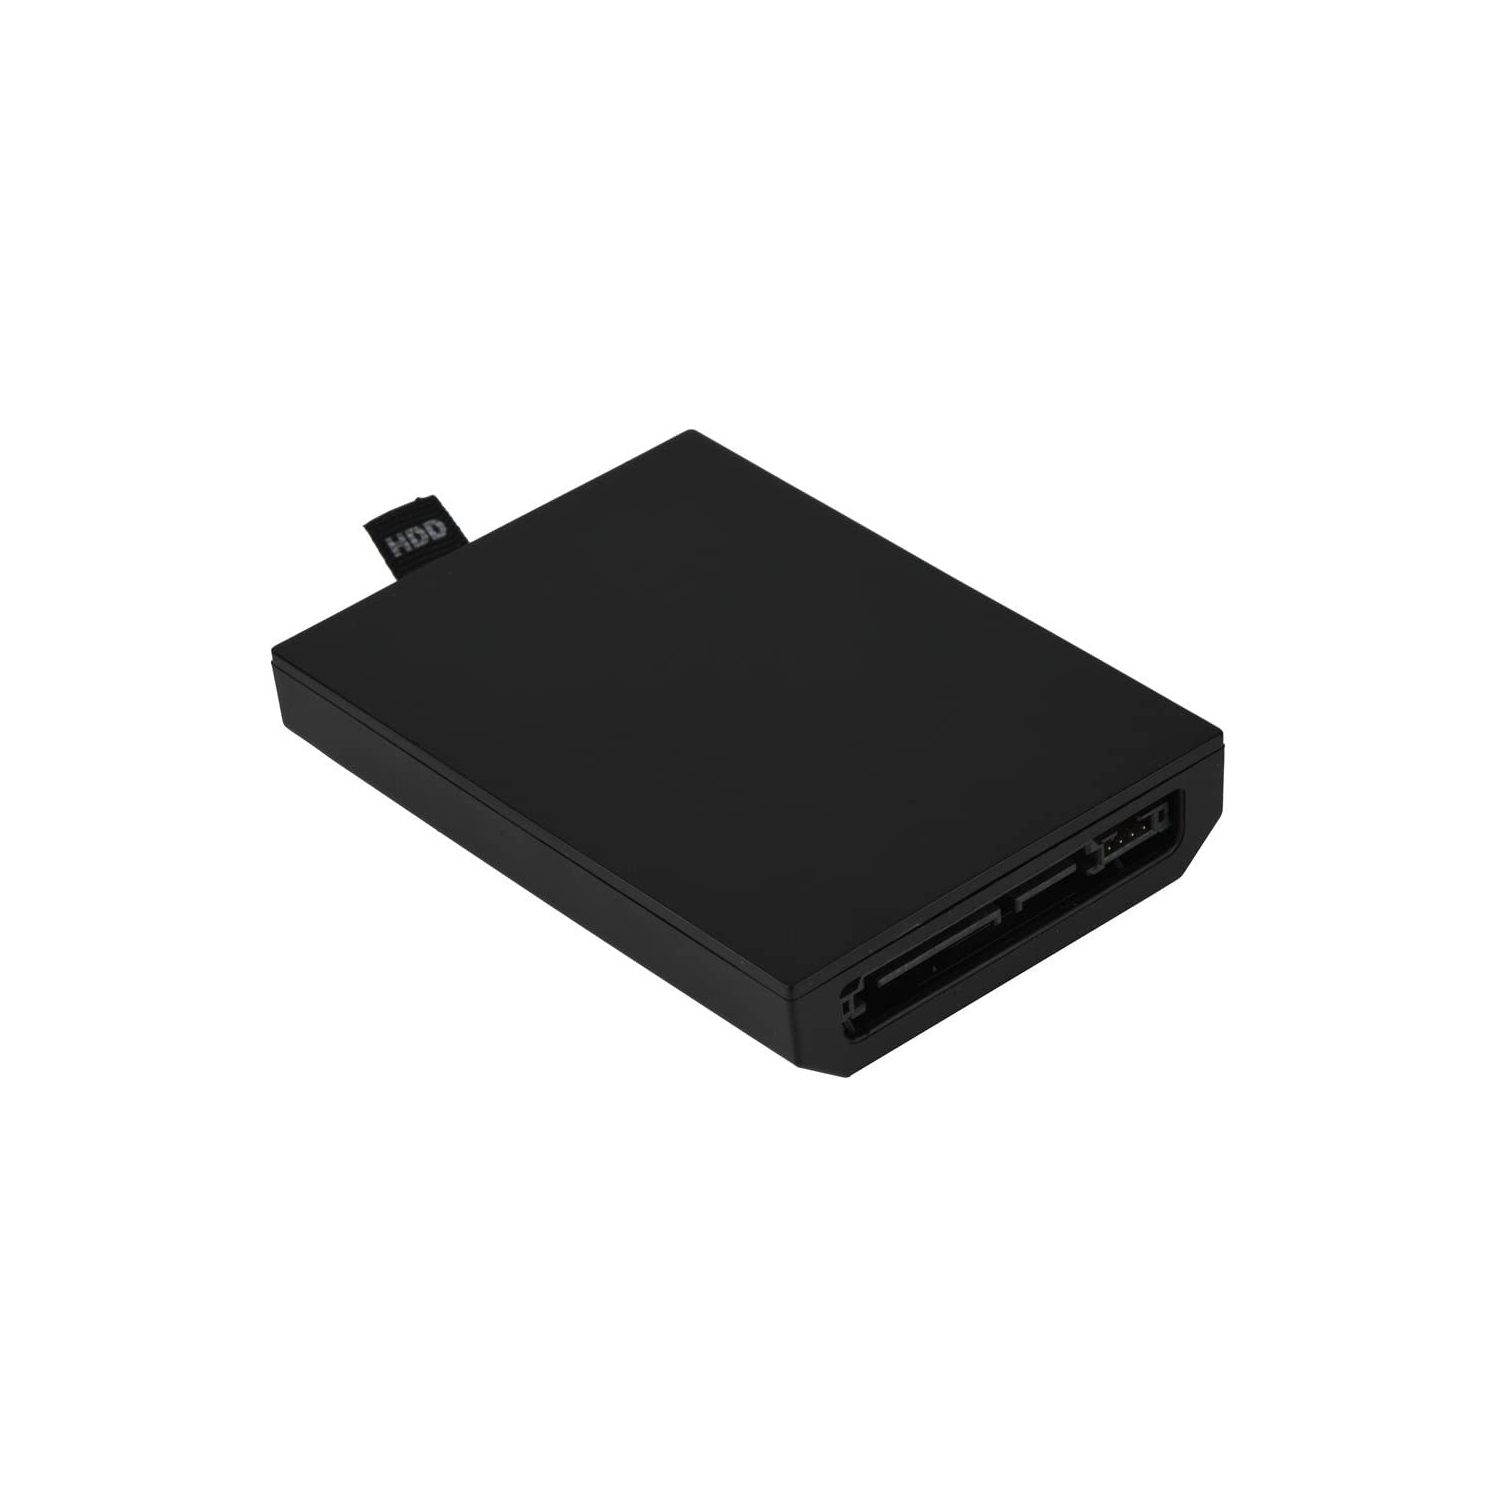 120GB Internal HDD Hard Drive Disk for Xbox 360/Slim Consoles, Expand Data Storage